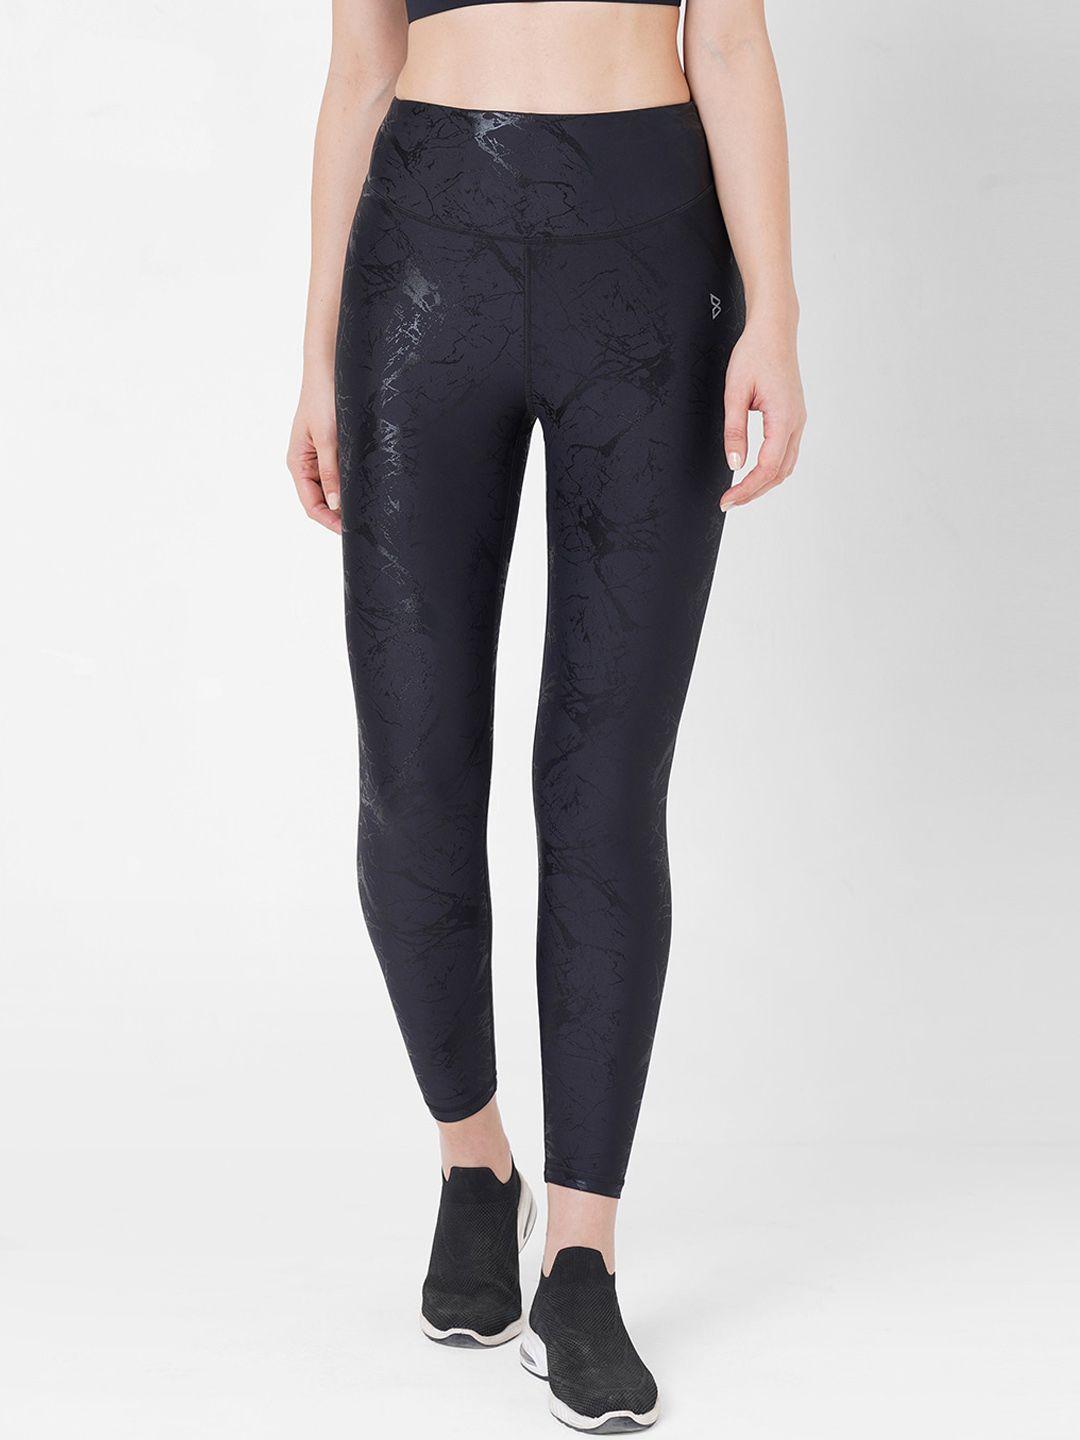 bodd active printed high-waisted tights